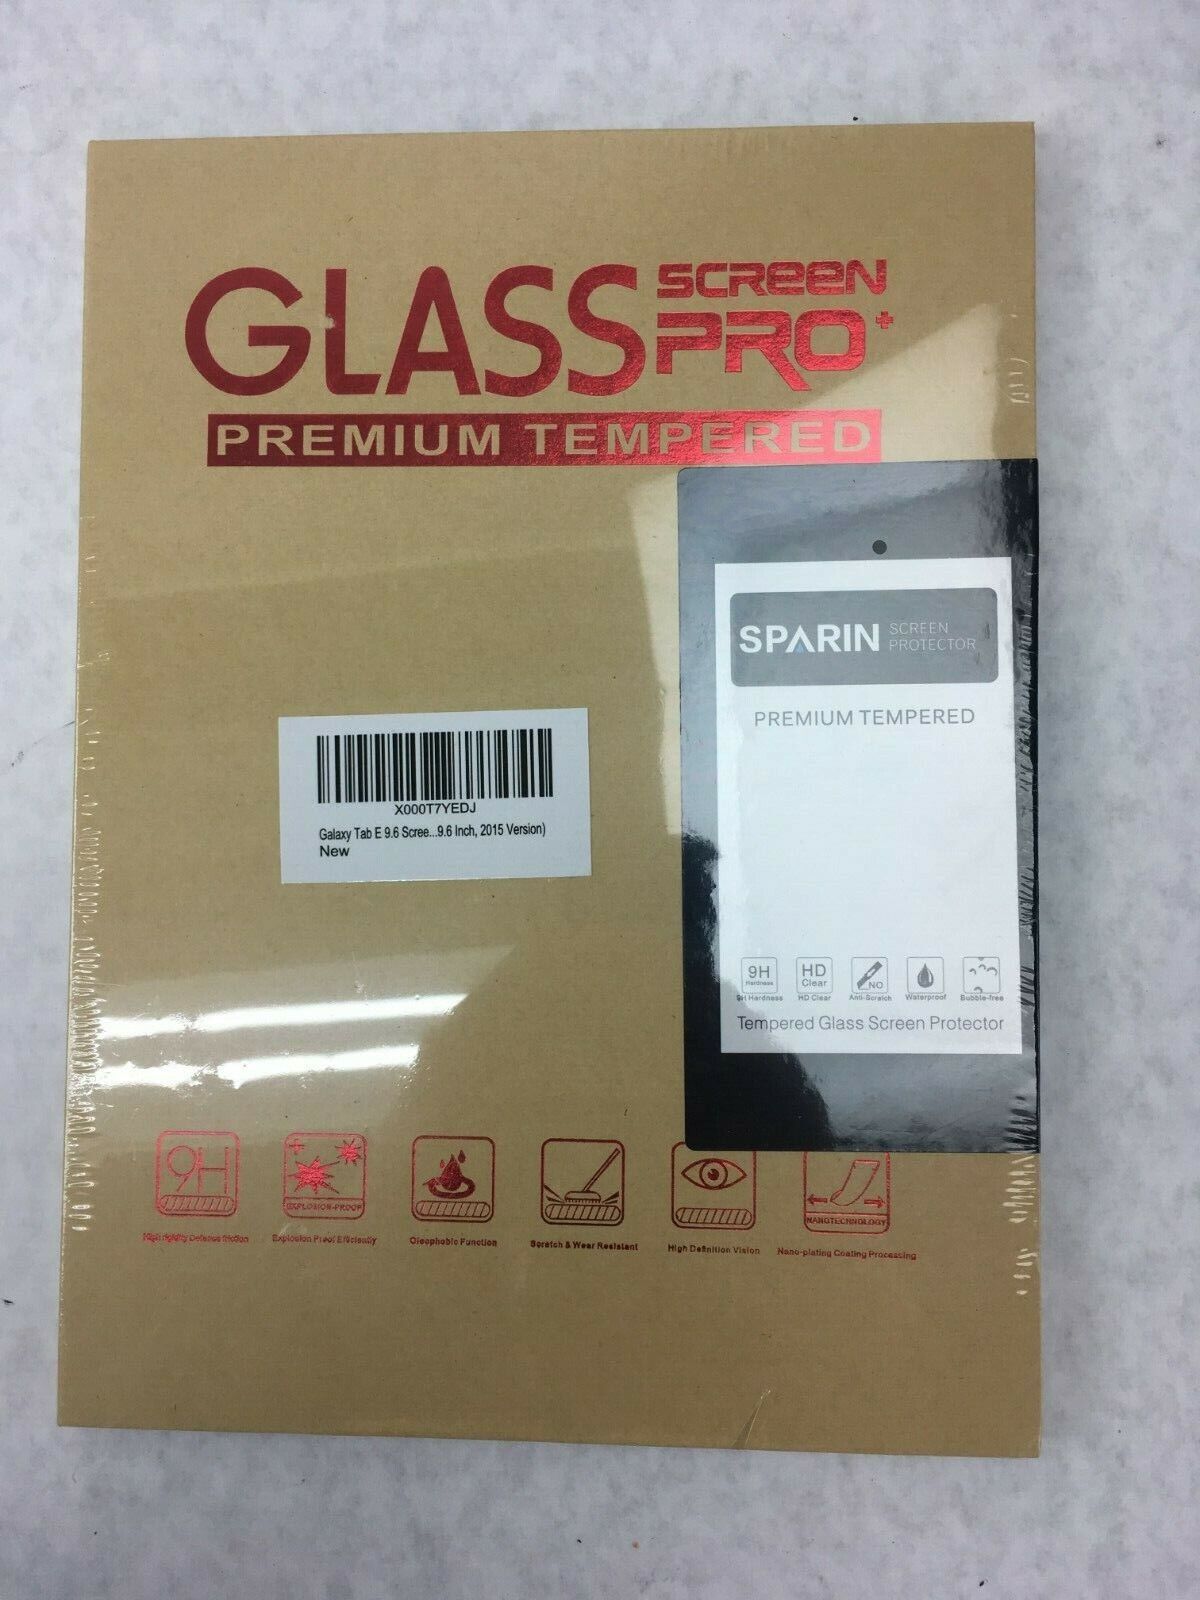 Premium Tempered 9H Glass Screen Protector For Samsung Galaxy Tab E 9.6 Lot of 7